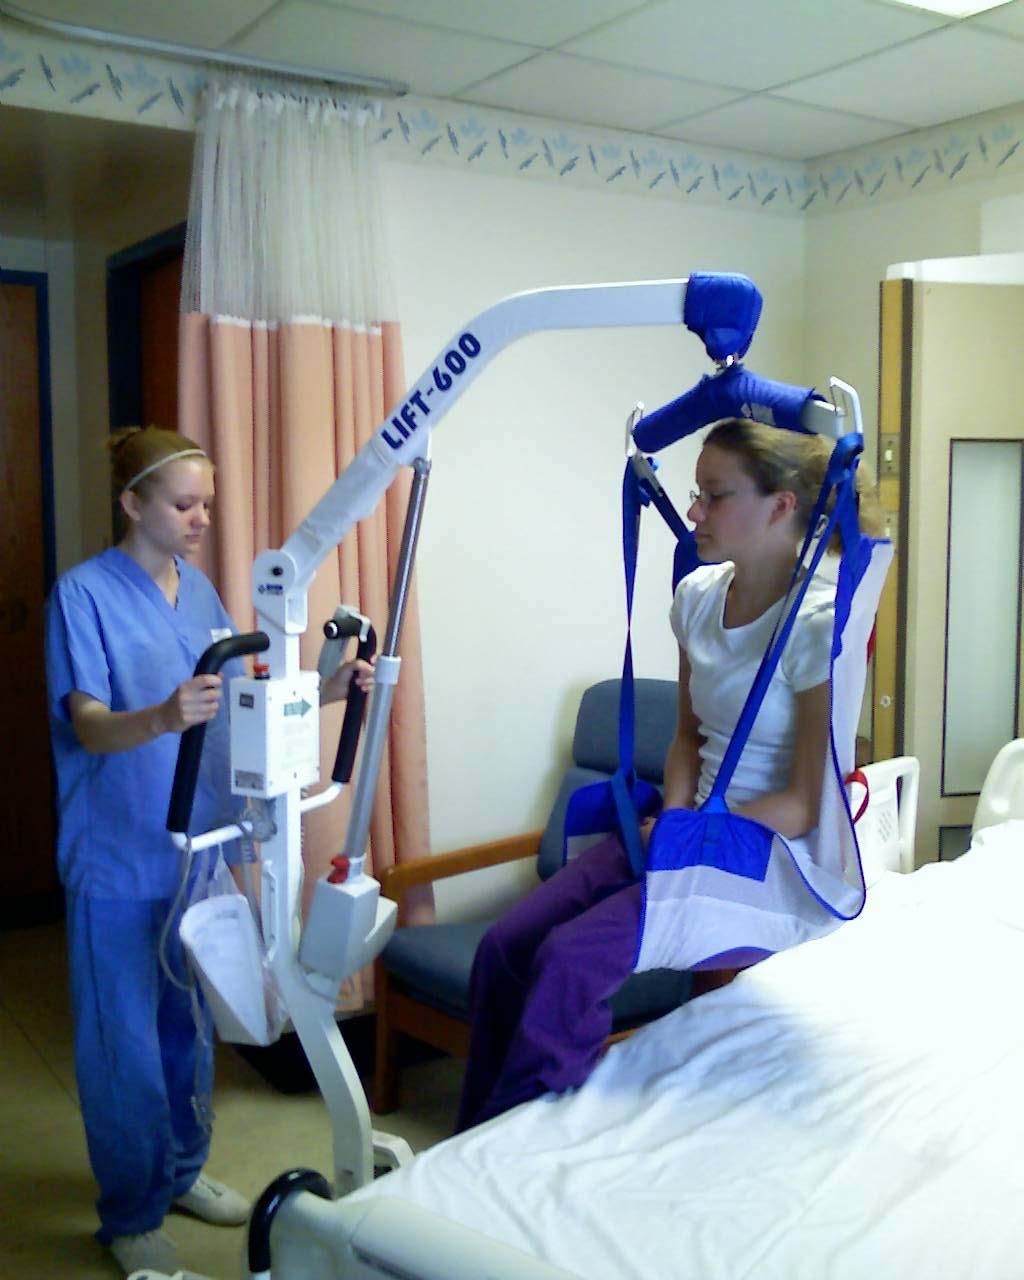 Full Mechanical Lift Using a mechanical lift provides a safe and gentle alternative for transferring a patient